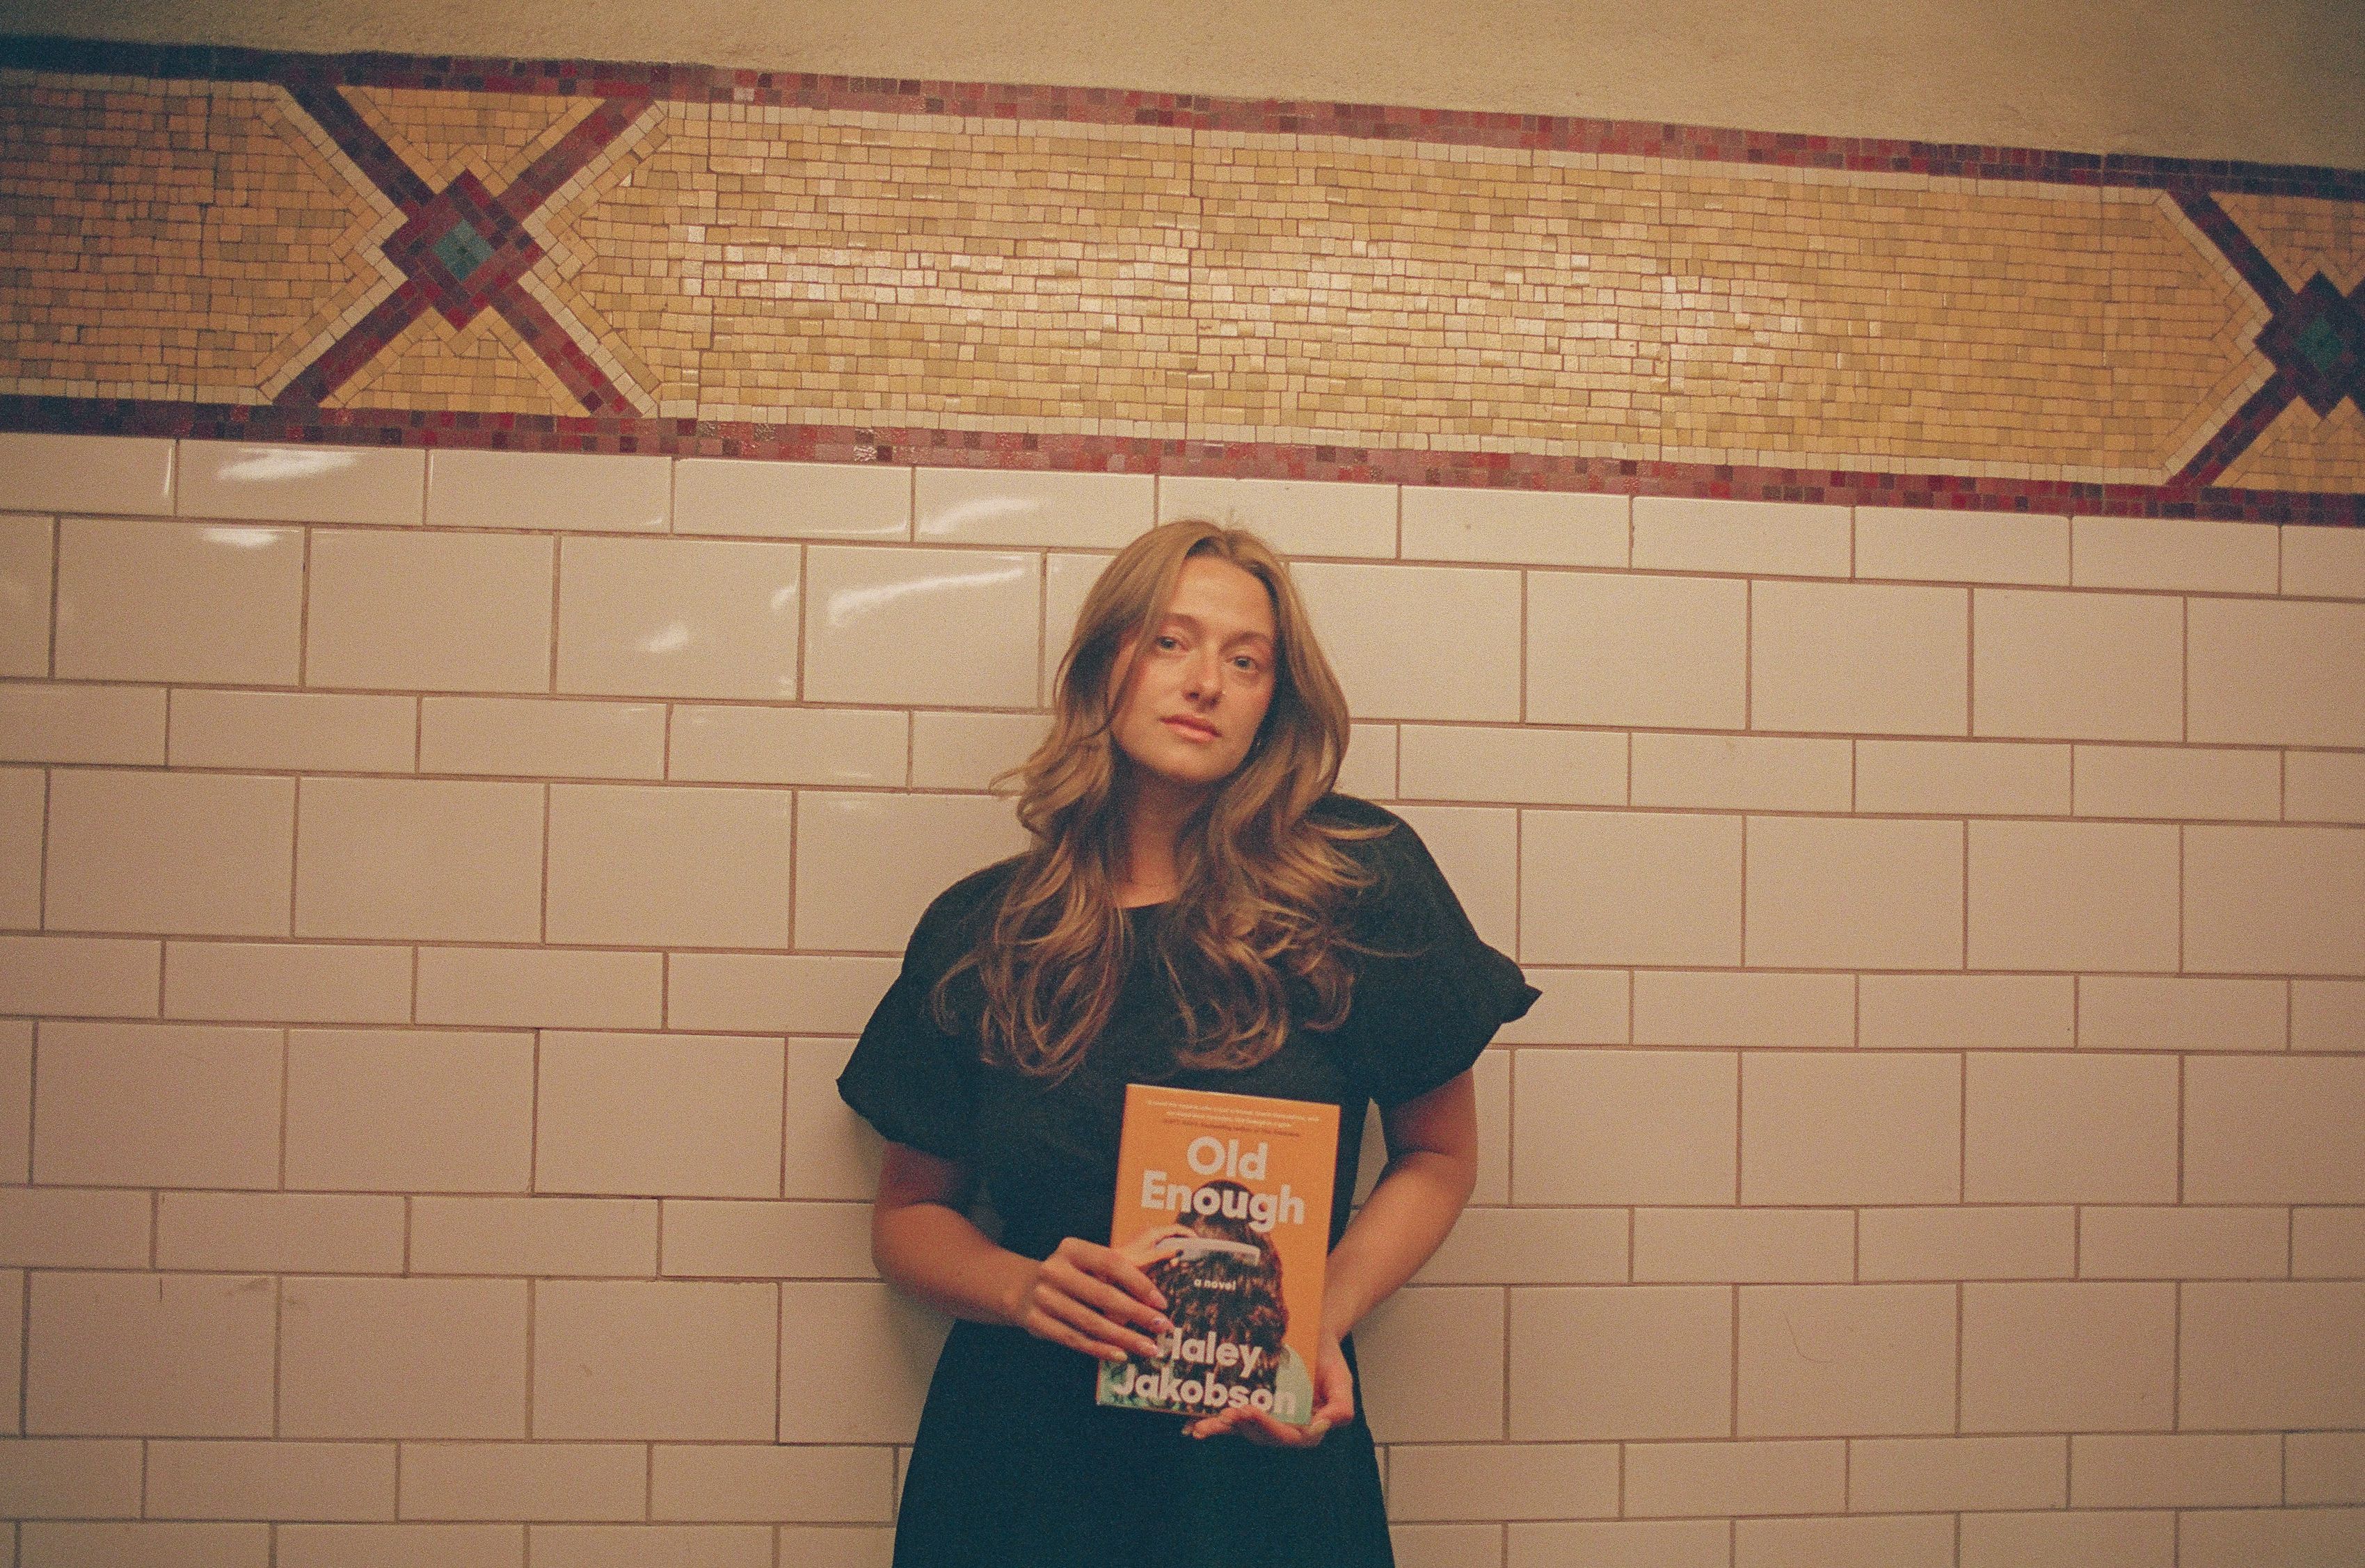 Haley Jakobson, a white queer femme, stands against an ornate tile backdrop while posing with her debut book, "Old Enough."